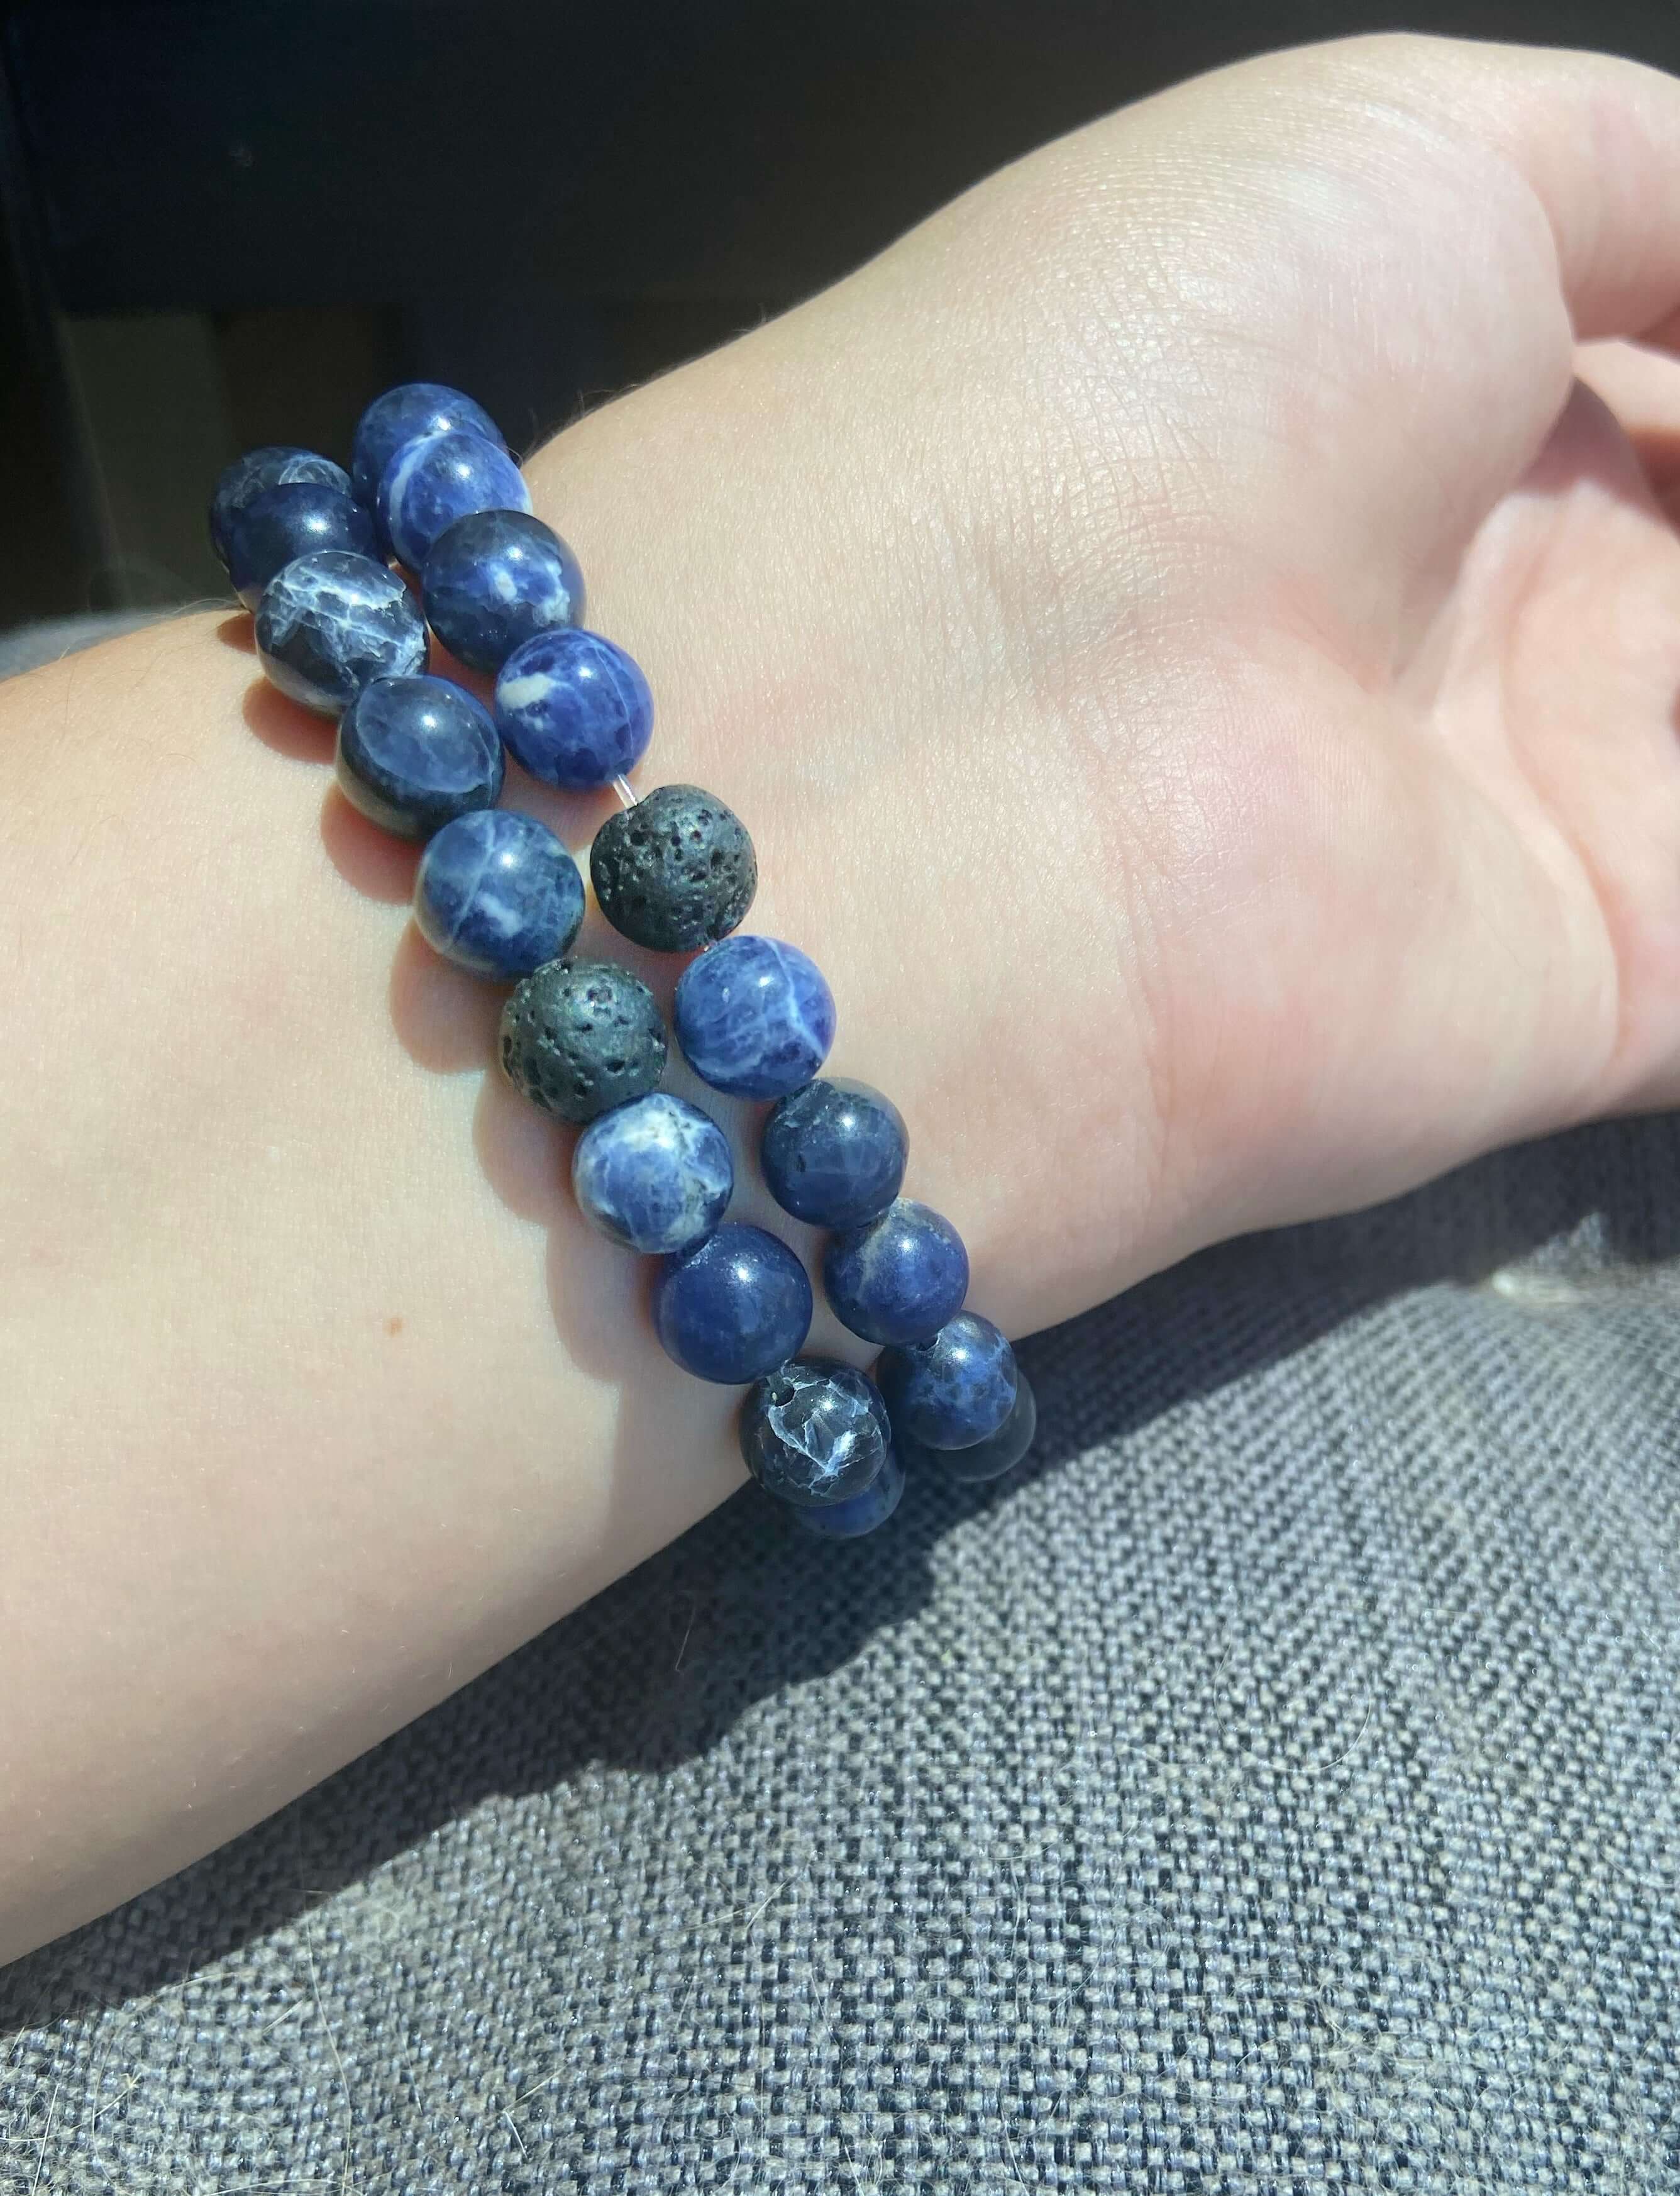 Sodalite Bracelet This bracelet is made with high-quality Sodalite gemstones which bring logic and intuition to the wearer. Zodiac Signs: Virgo and Sagittarius. Chakras: Throat and Third Eye. Handmade with authentic crystals & gemstones in Minneapolis, MN